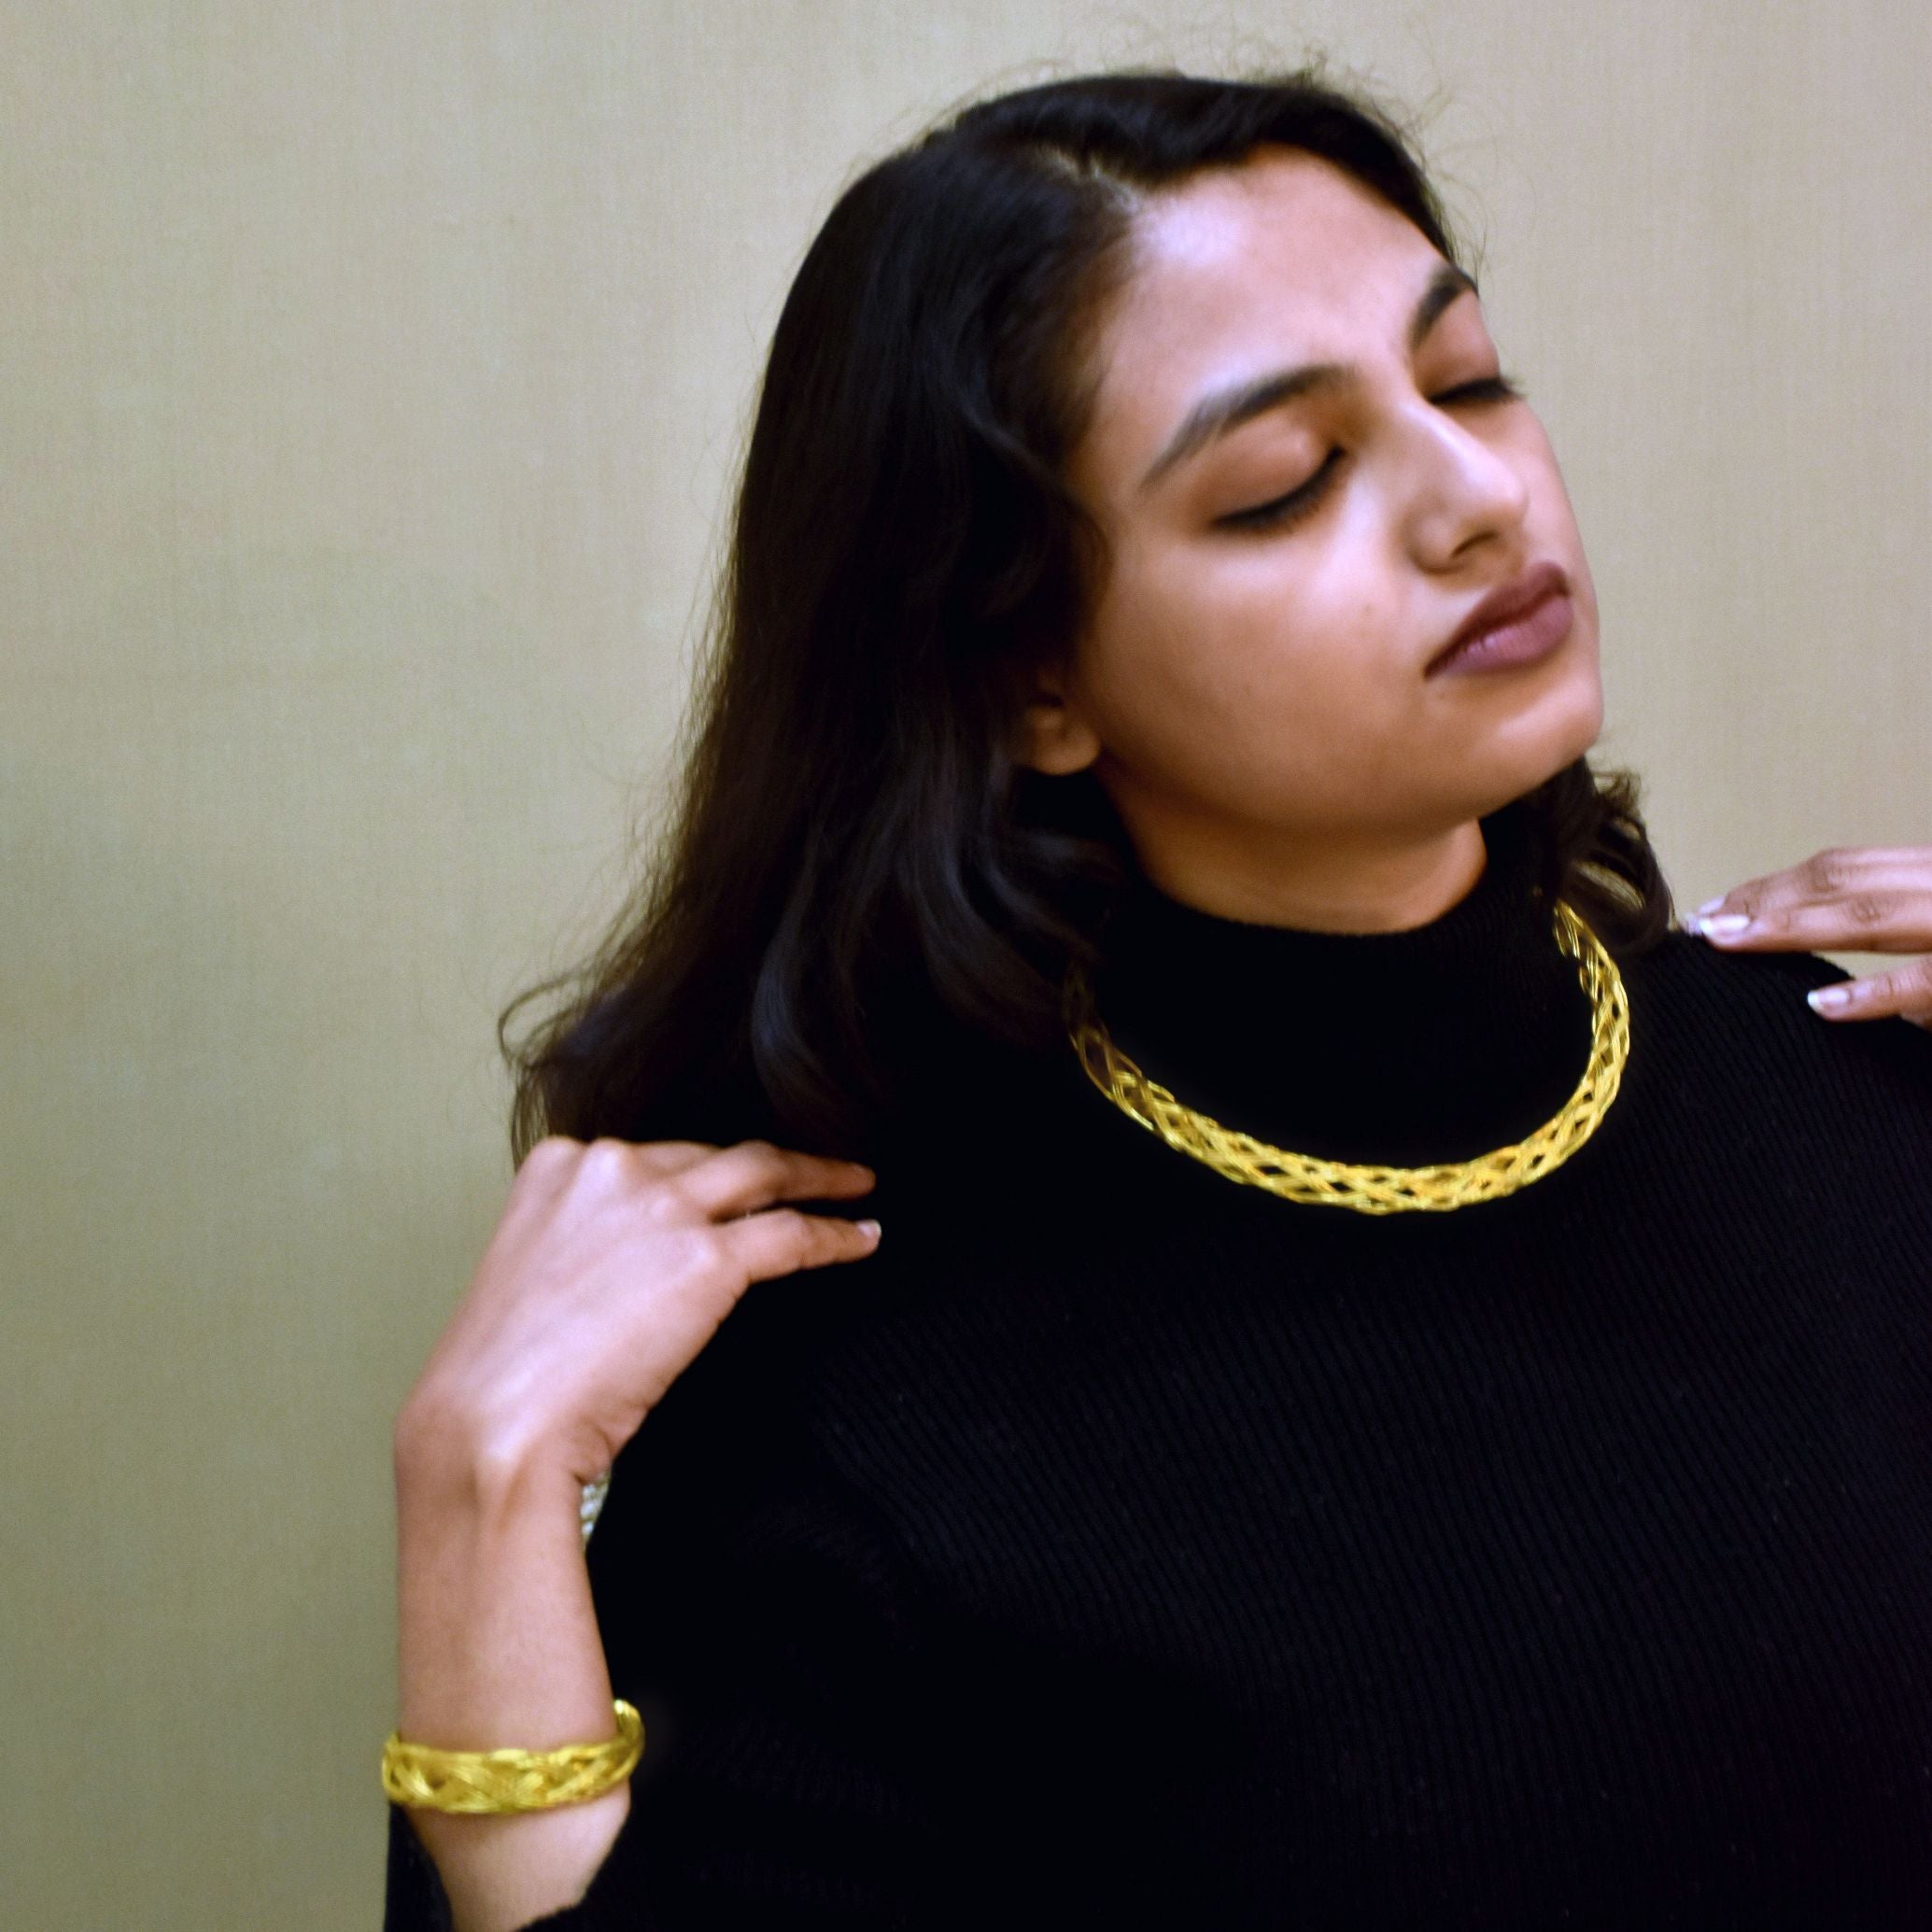 Tokri Gold Wearable Jewellery, hand necklace, gold necklace, oxidized necklace, handcrafted necklace, jewellery 